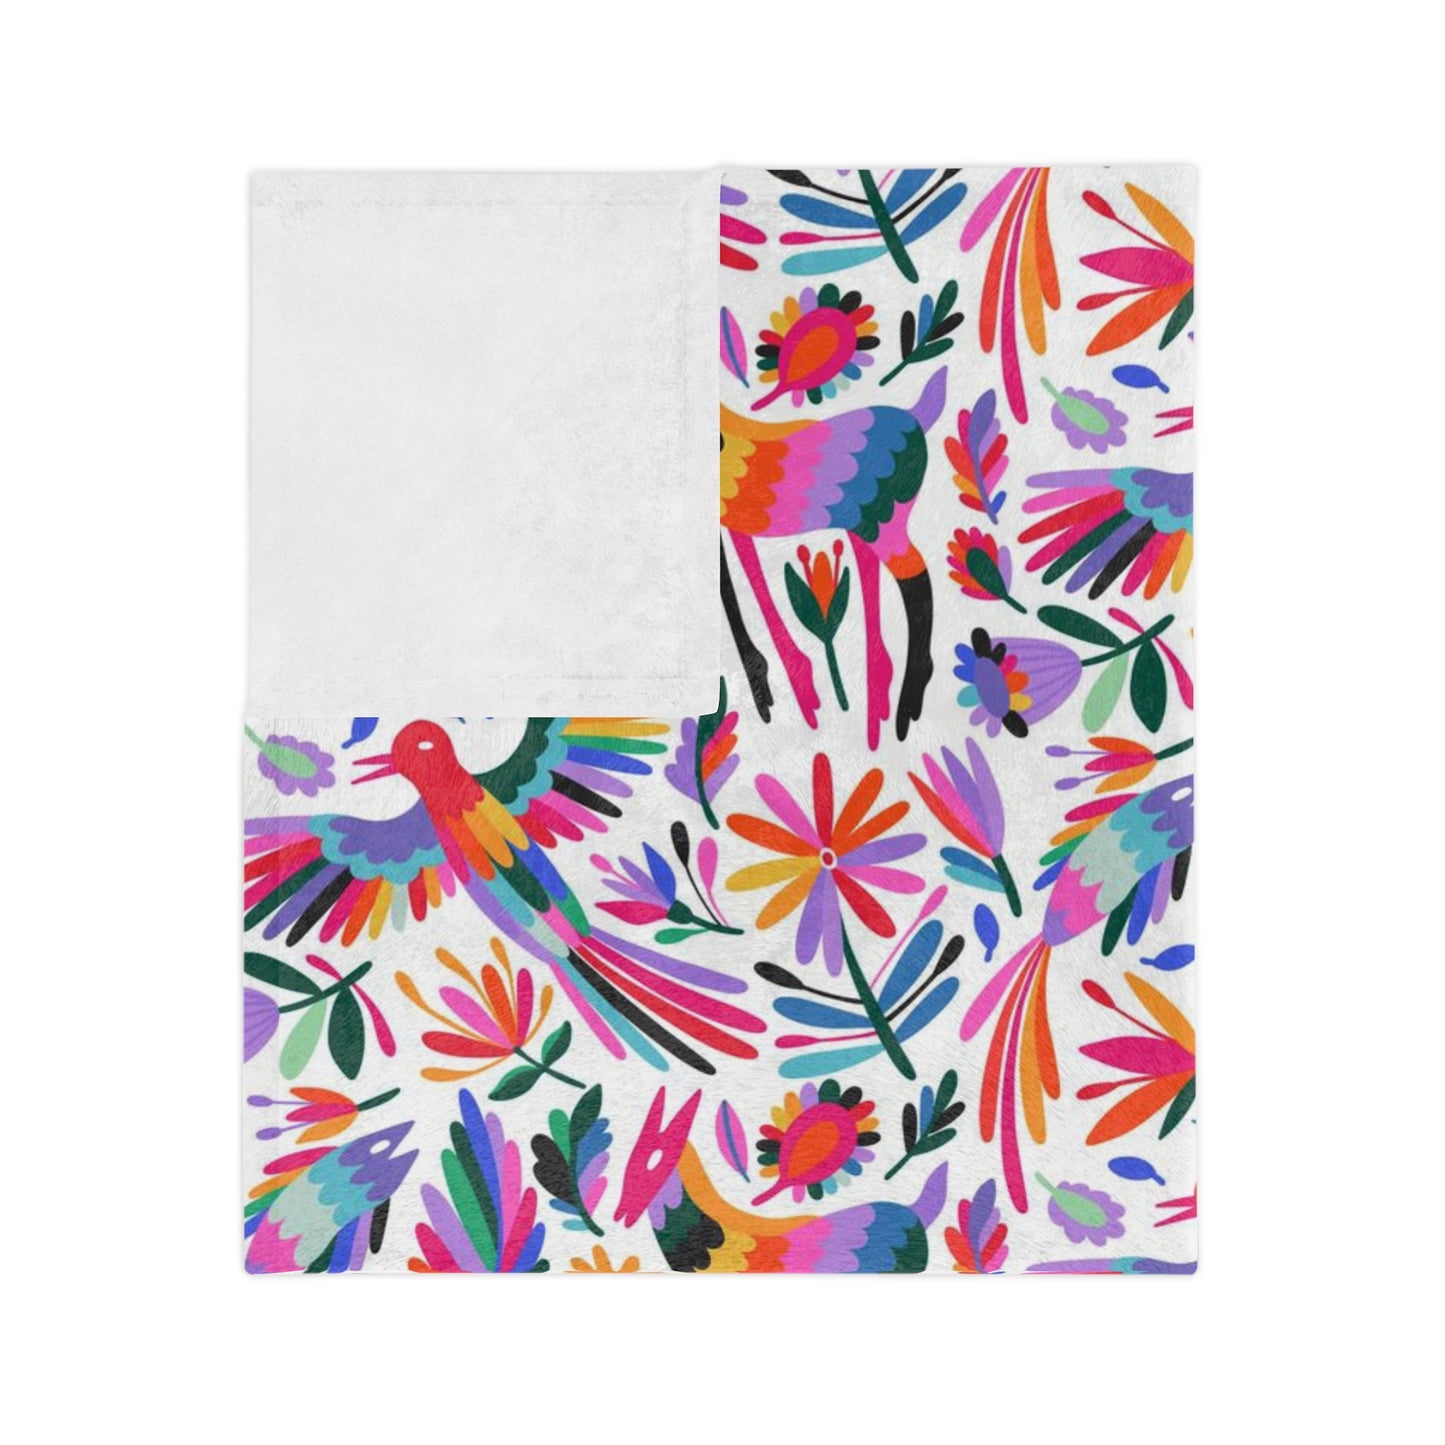 Otomi Velveteen Minky Blanket for Mexican home decor. Christmas gift for him or her. Mexican blanket with colorful Otomi art.